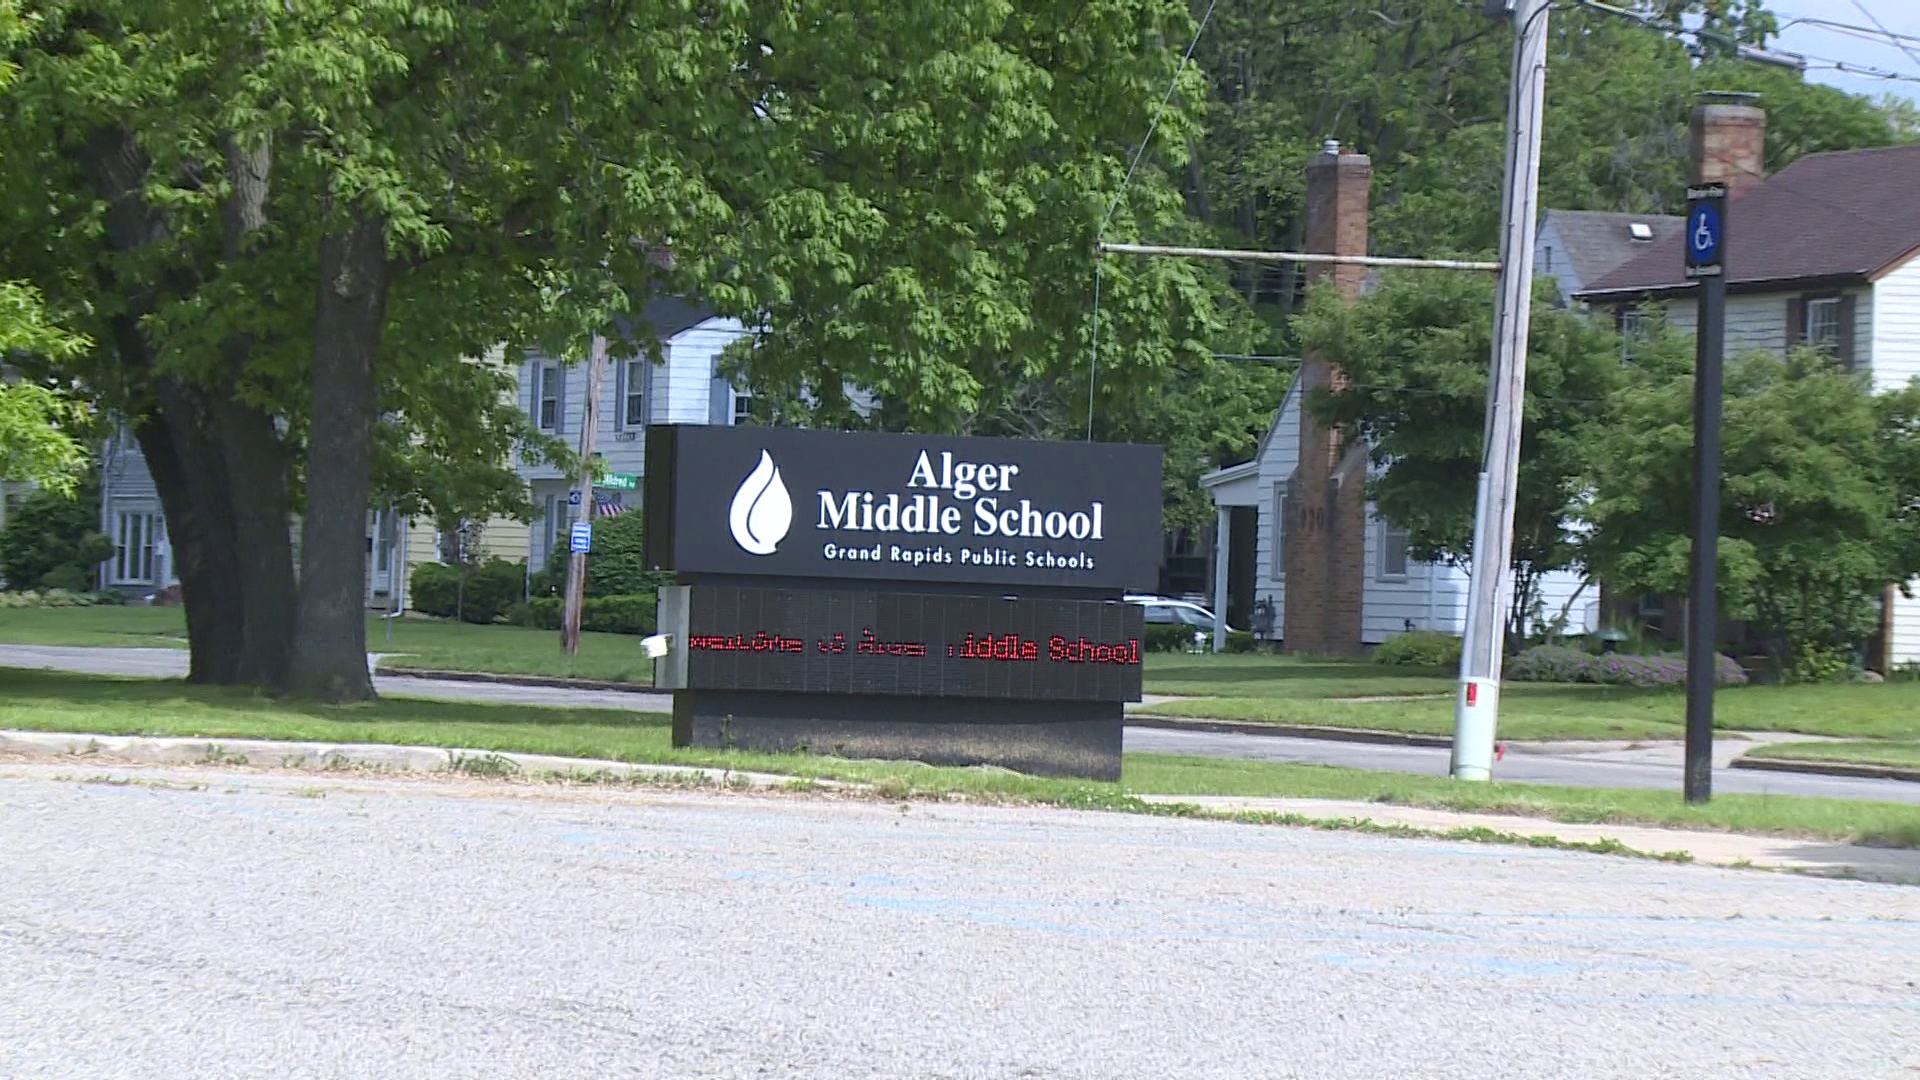 Two students were in a park near Alger Middle School adjacent to a school building when the shooting happened. The school was placed on Code Red.